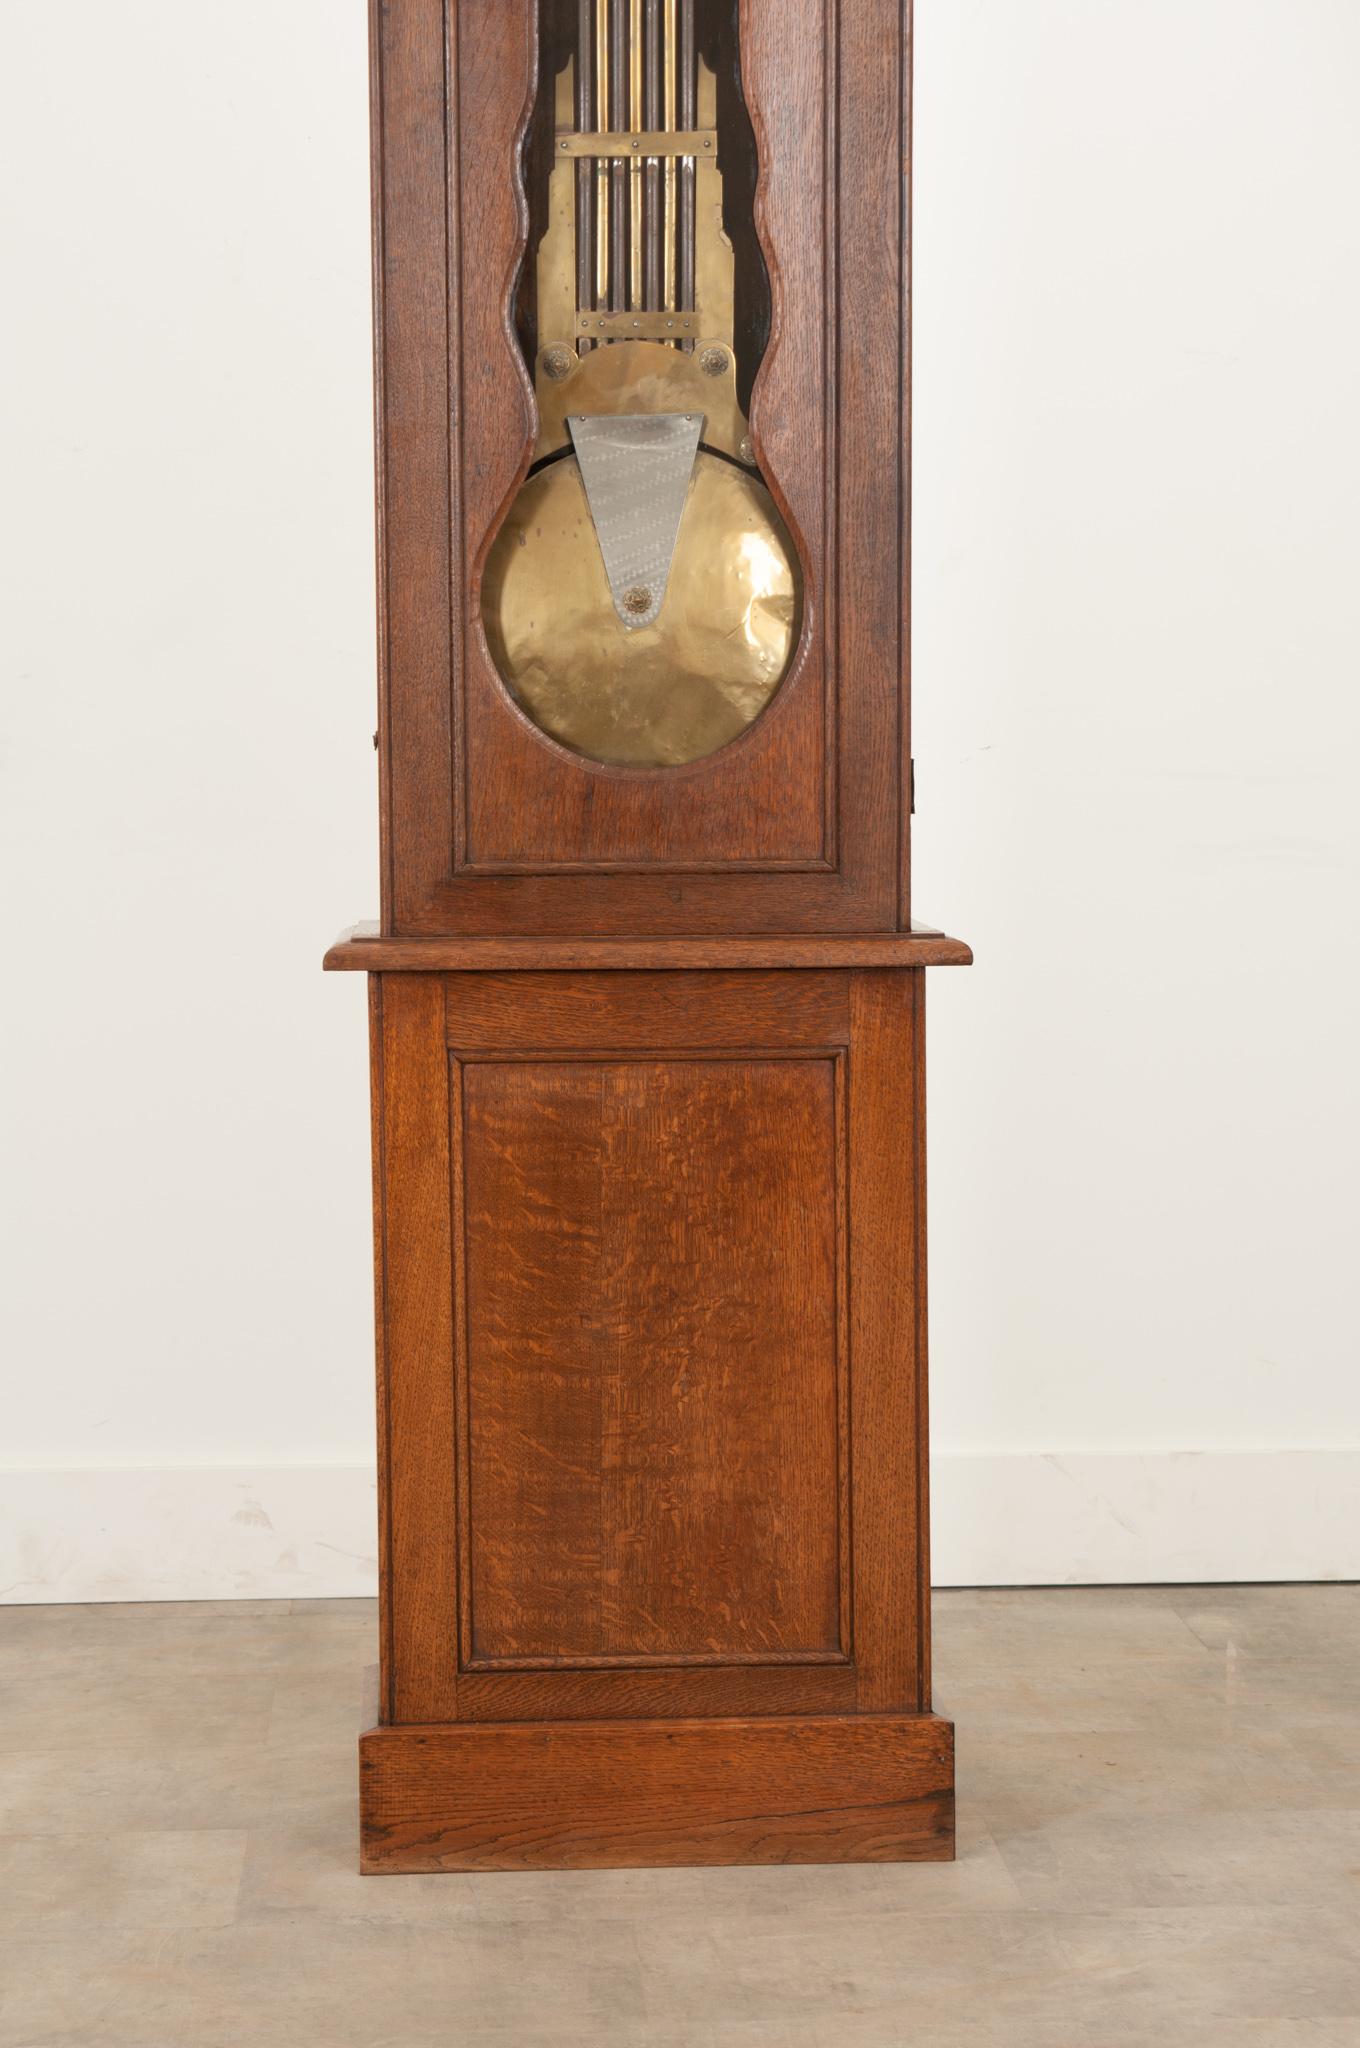 French 19th Century Tall Case Clock In Good Condition For Sale In Baton Rouge, LA